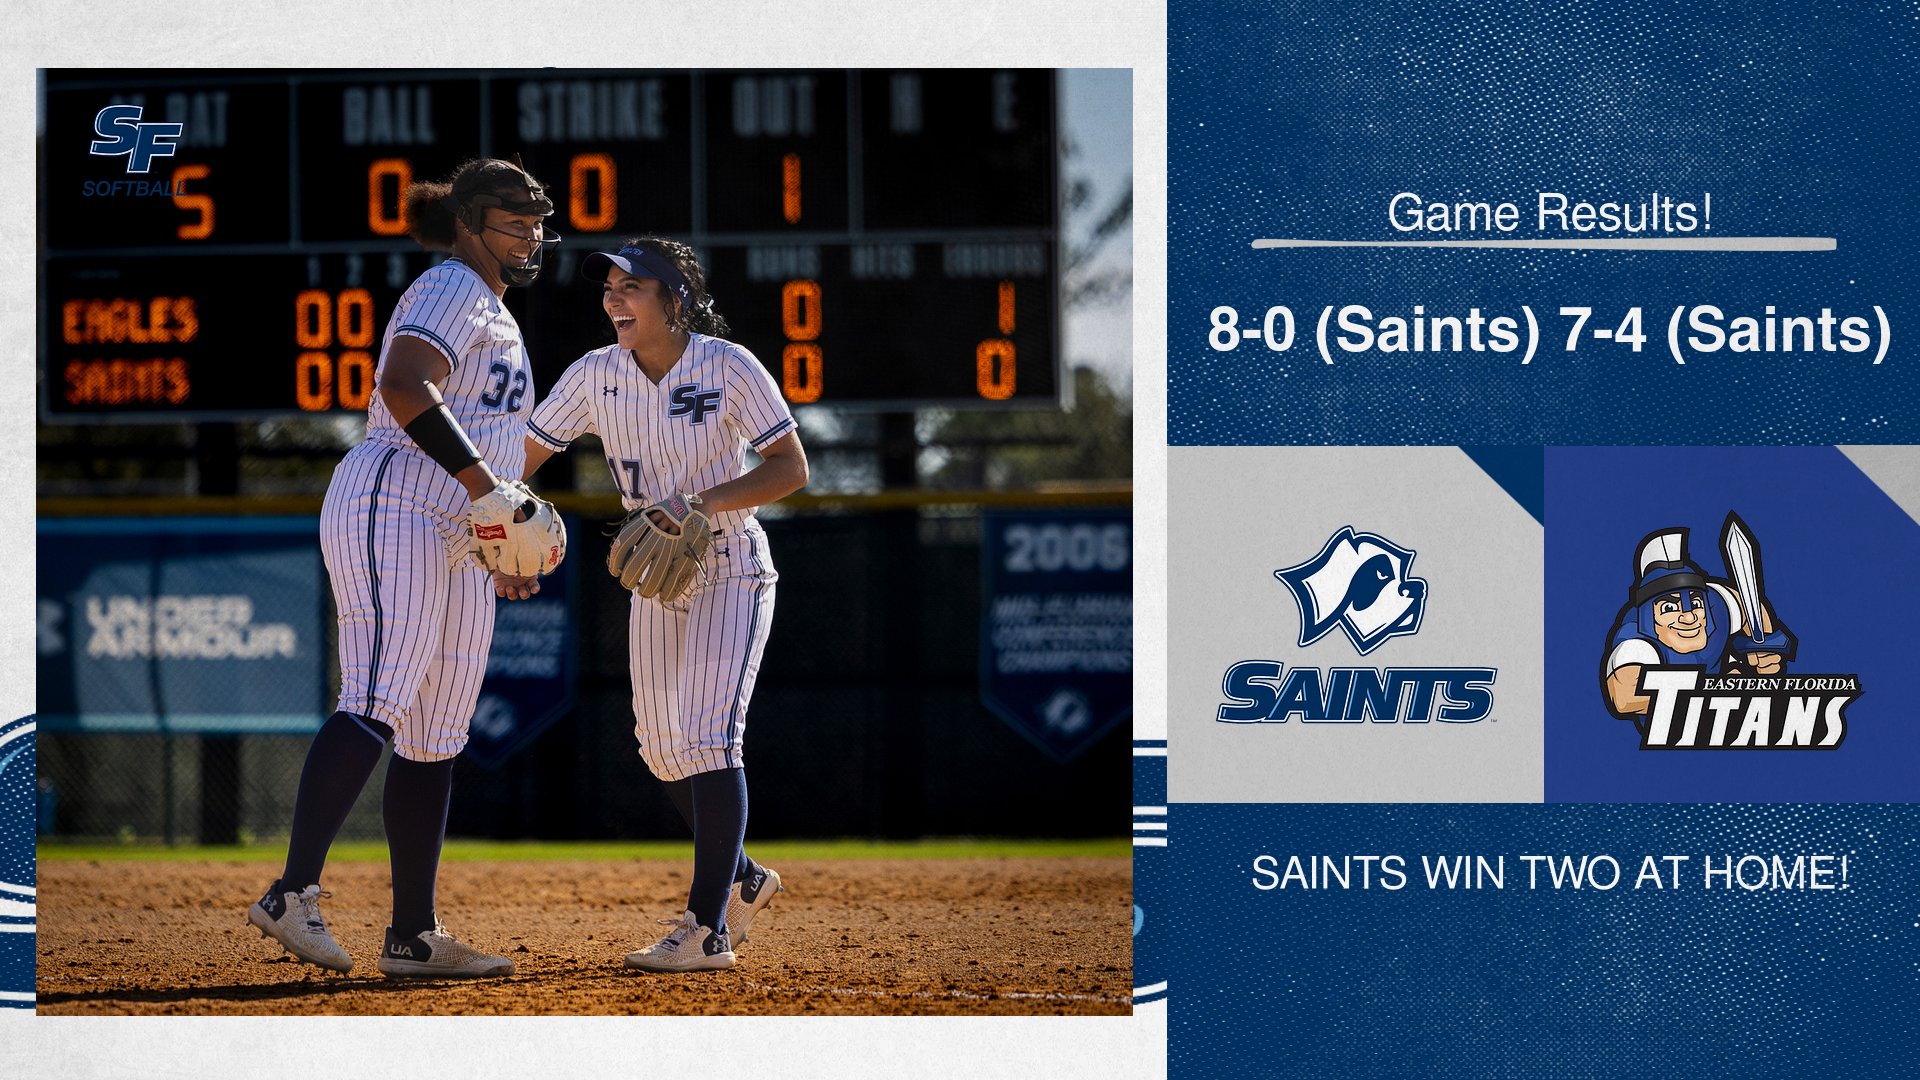 Saints Win Two at Home!